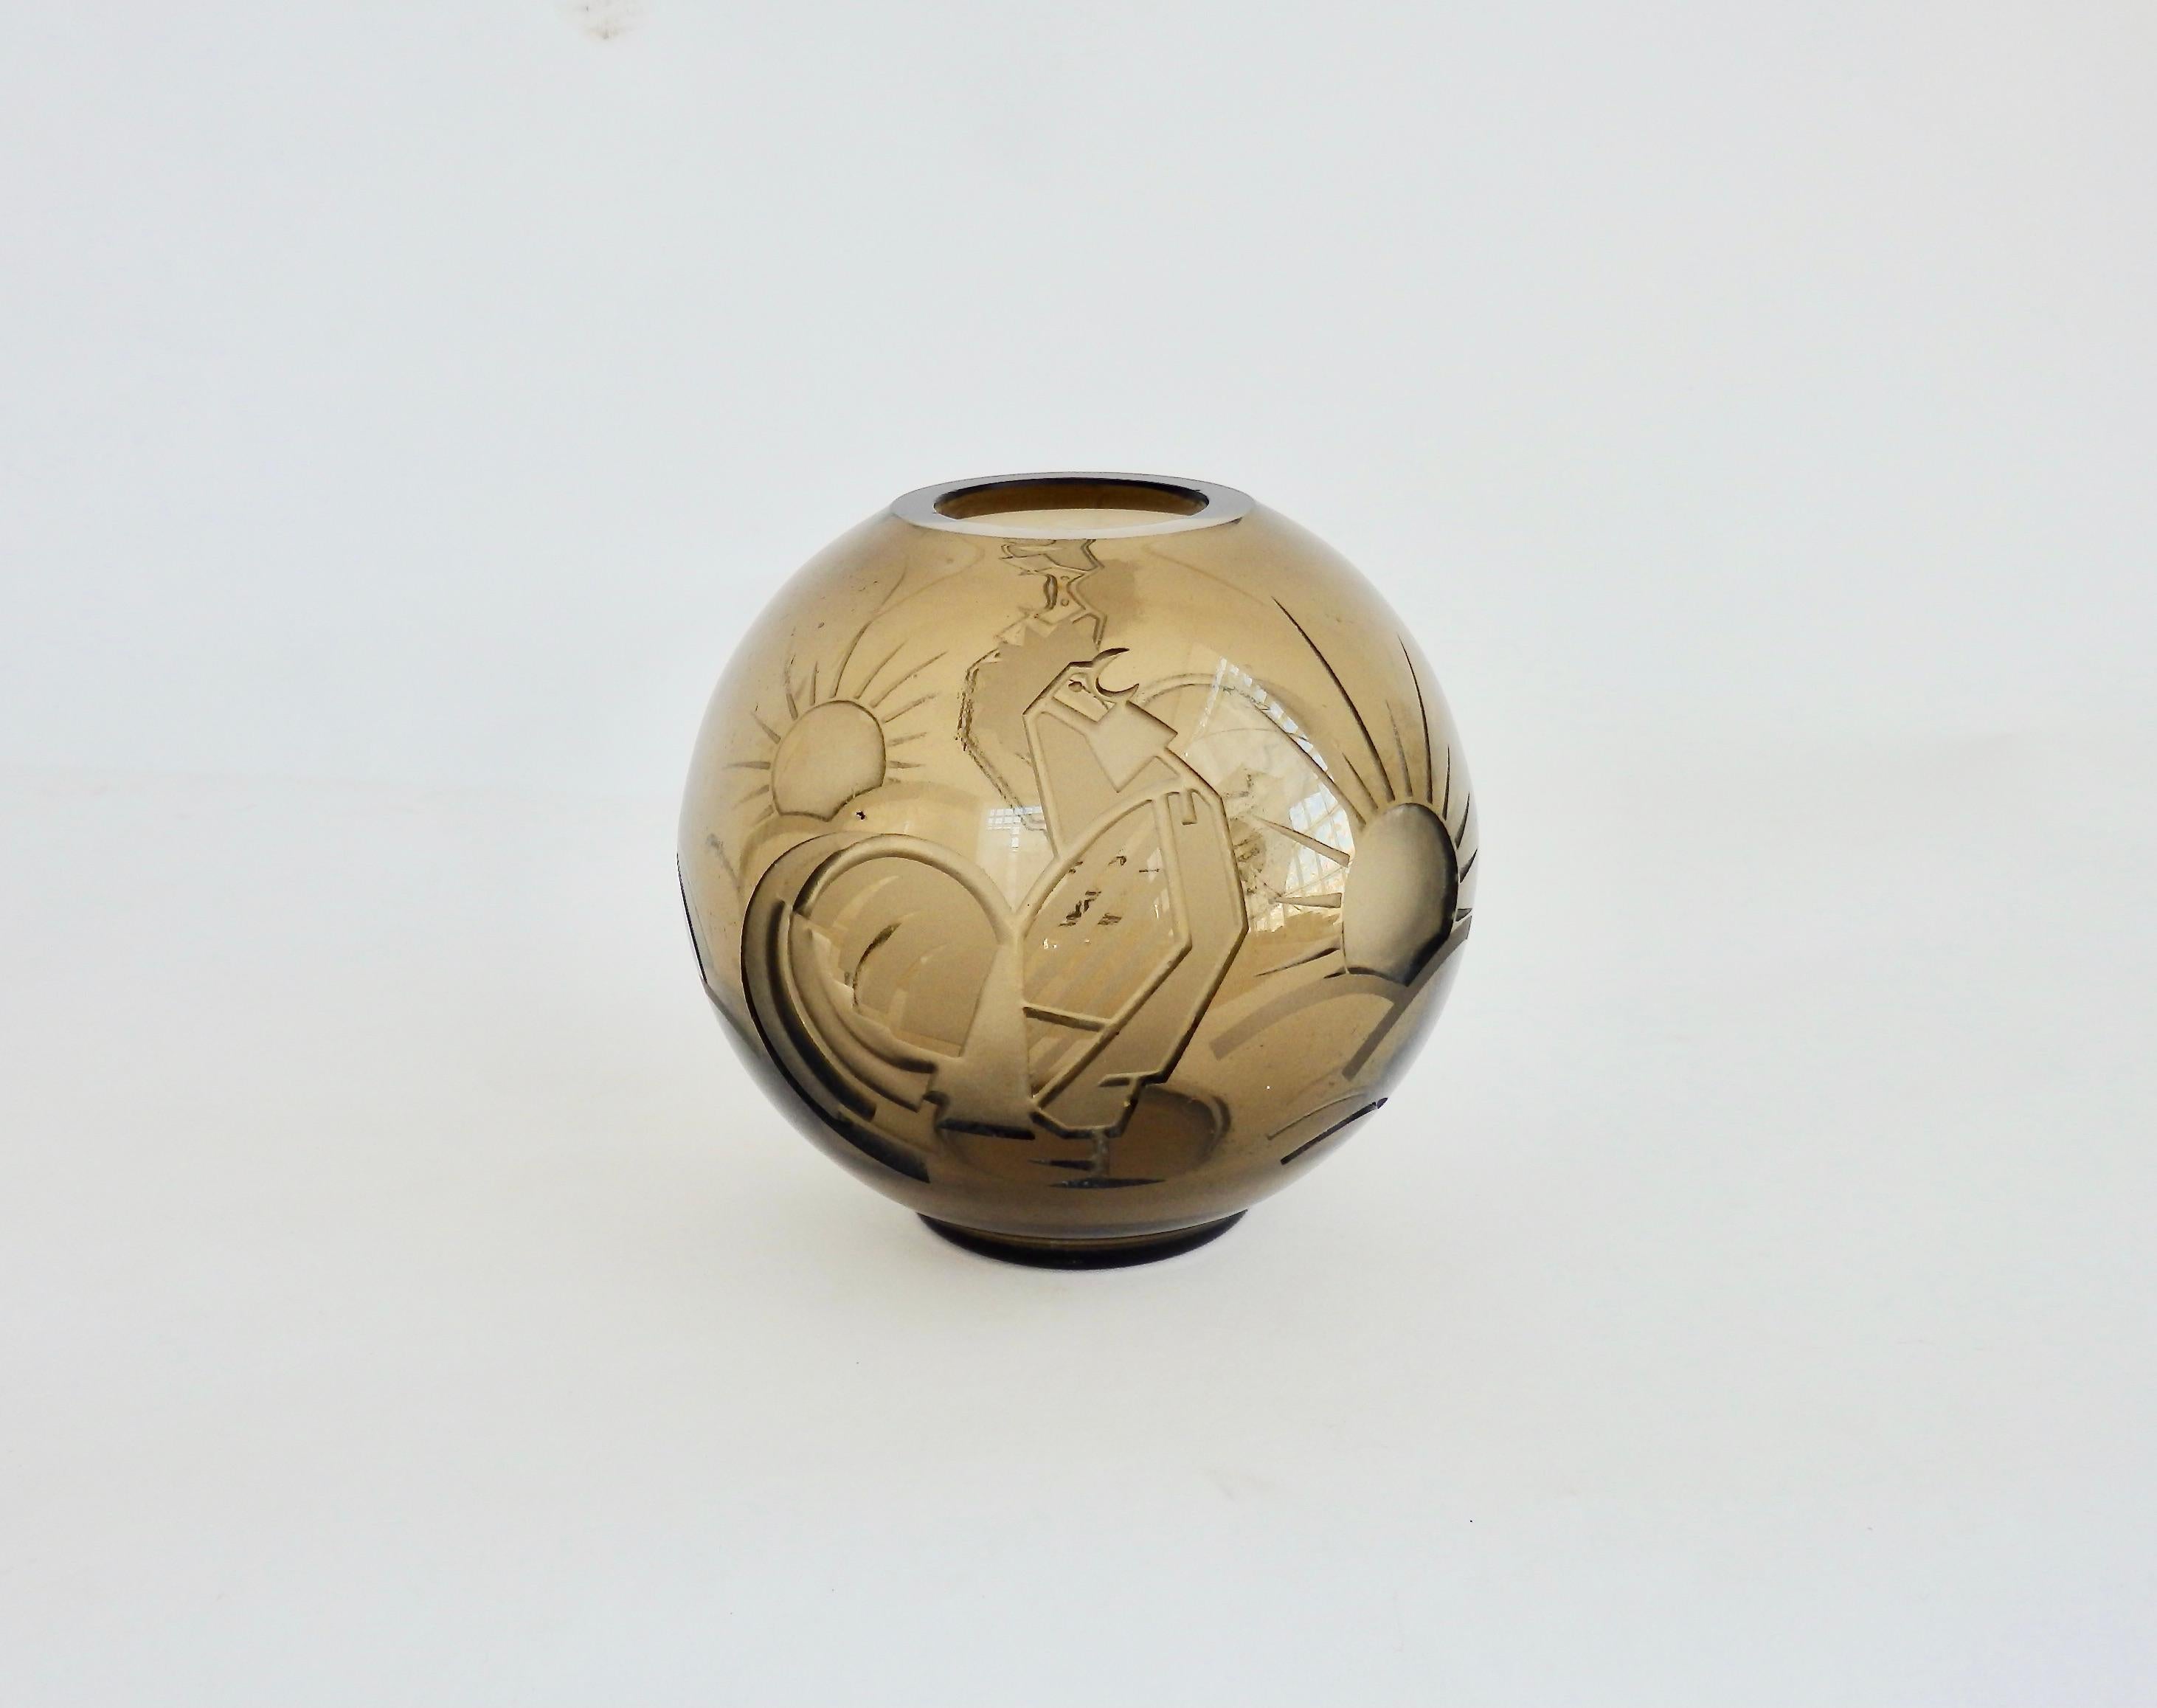 Nicely etched smoked glass ball shape vase . Art Deco styled design depicts a rooster. 